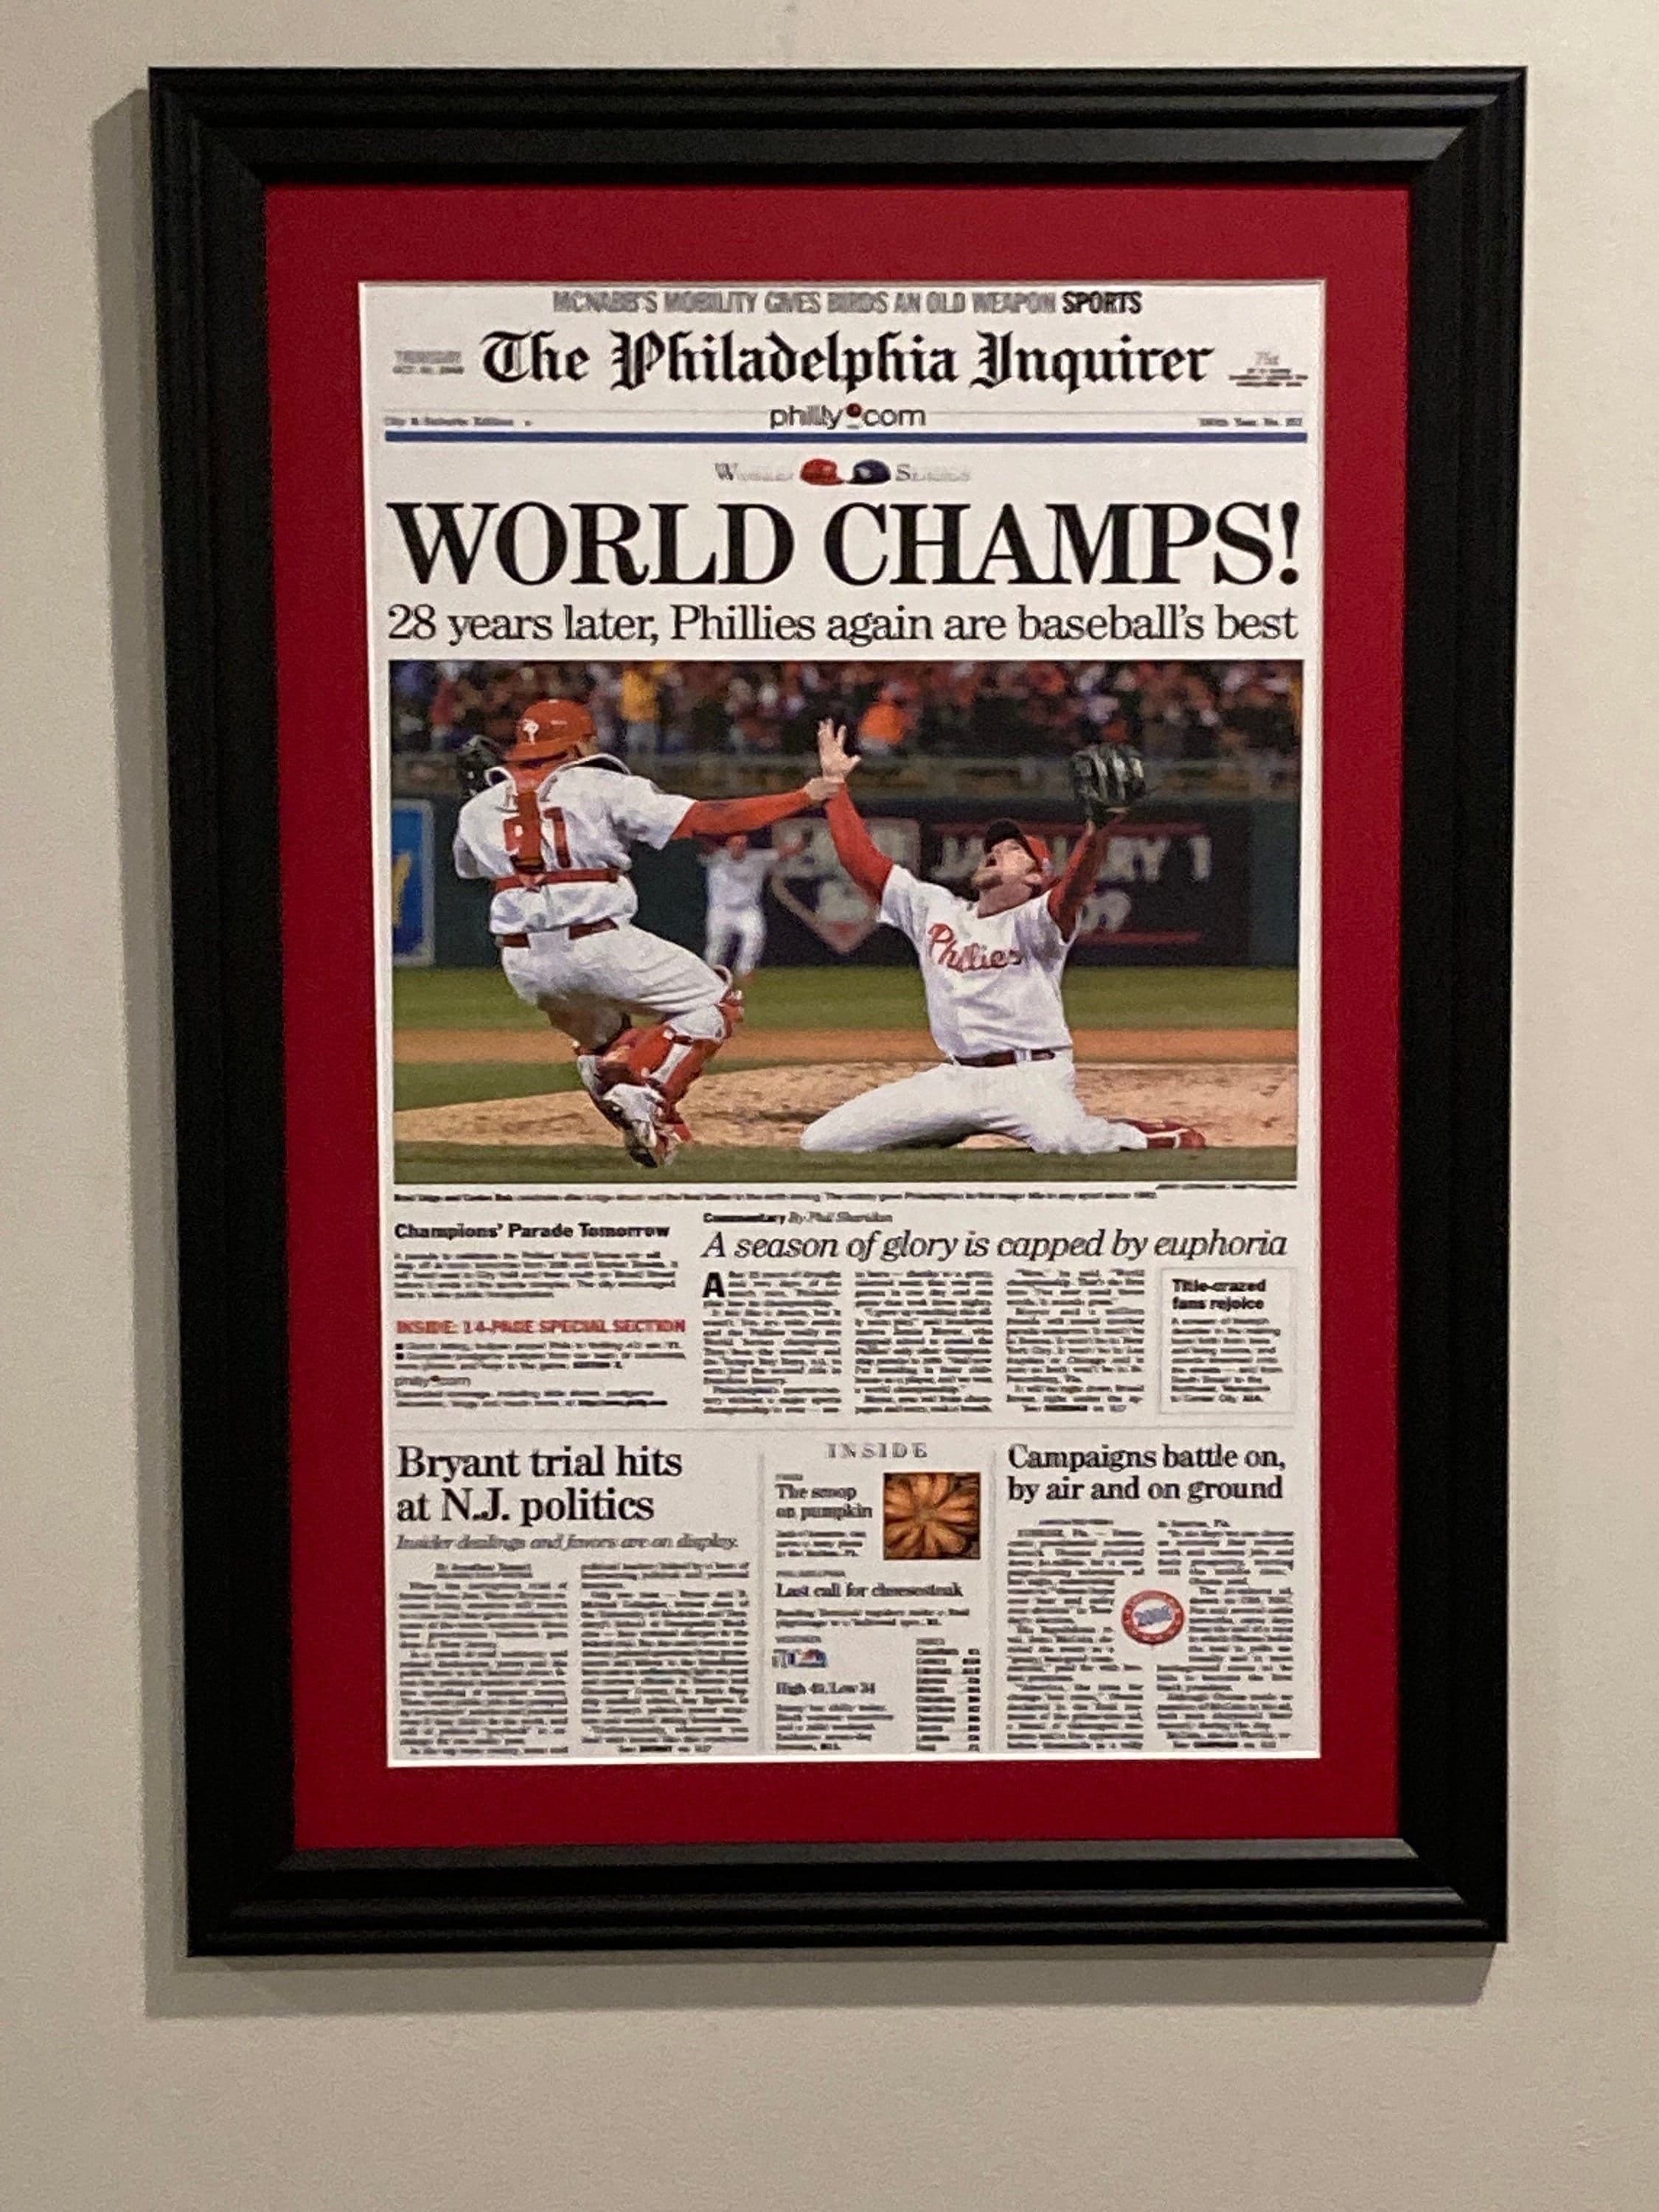 Philadelphia Phillies - 2008 World Series Champions - Philadelphia Inquirer  Newspaper Front Page - Matted & Framed